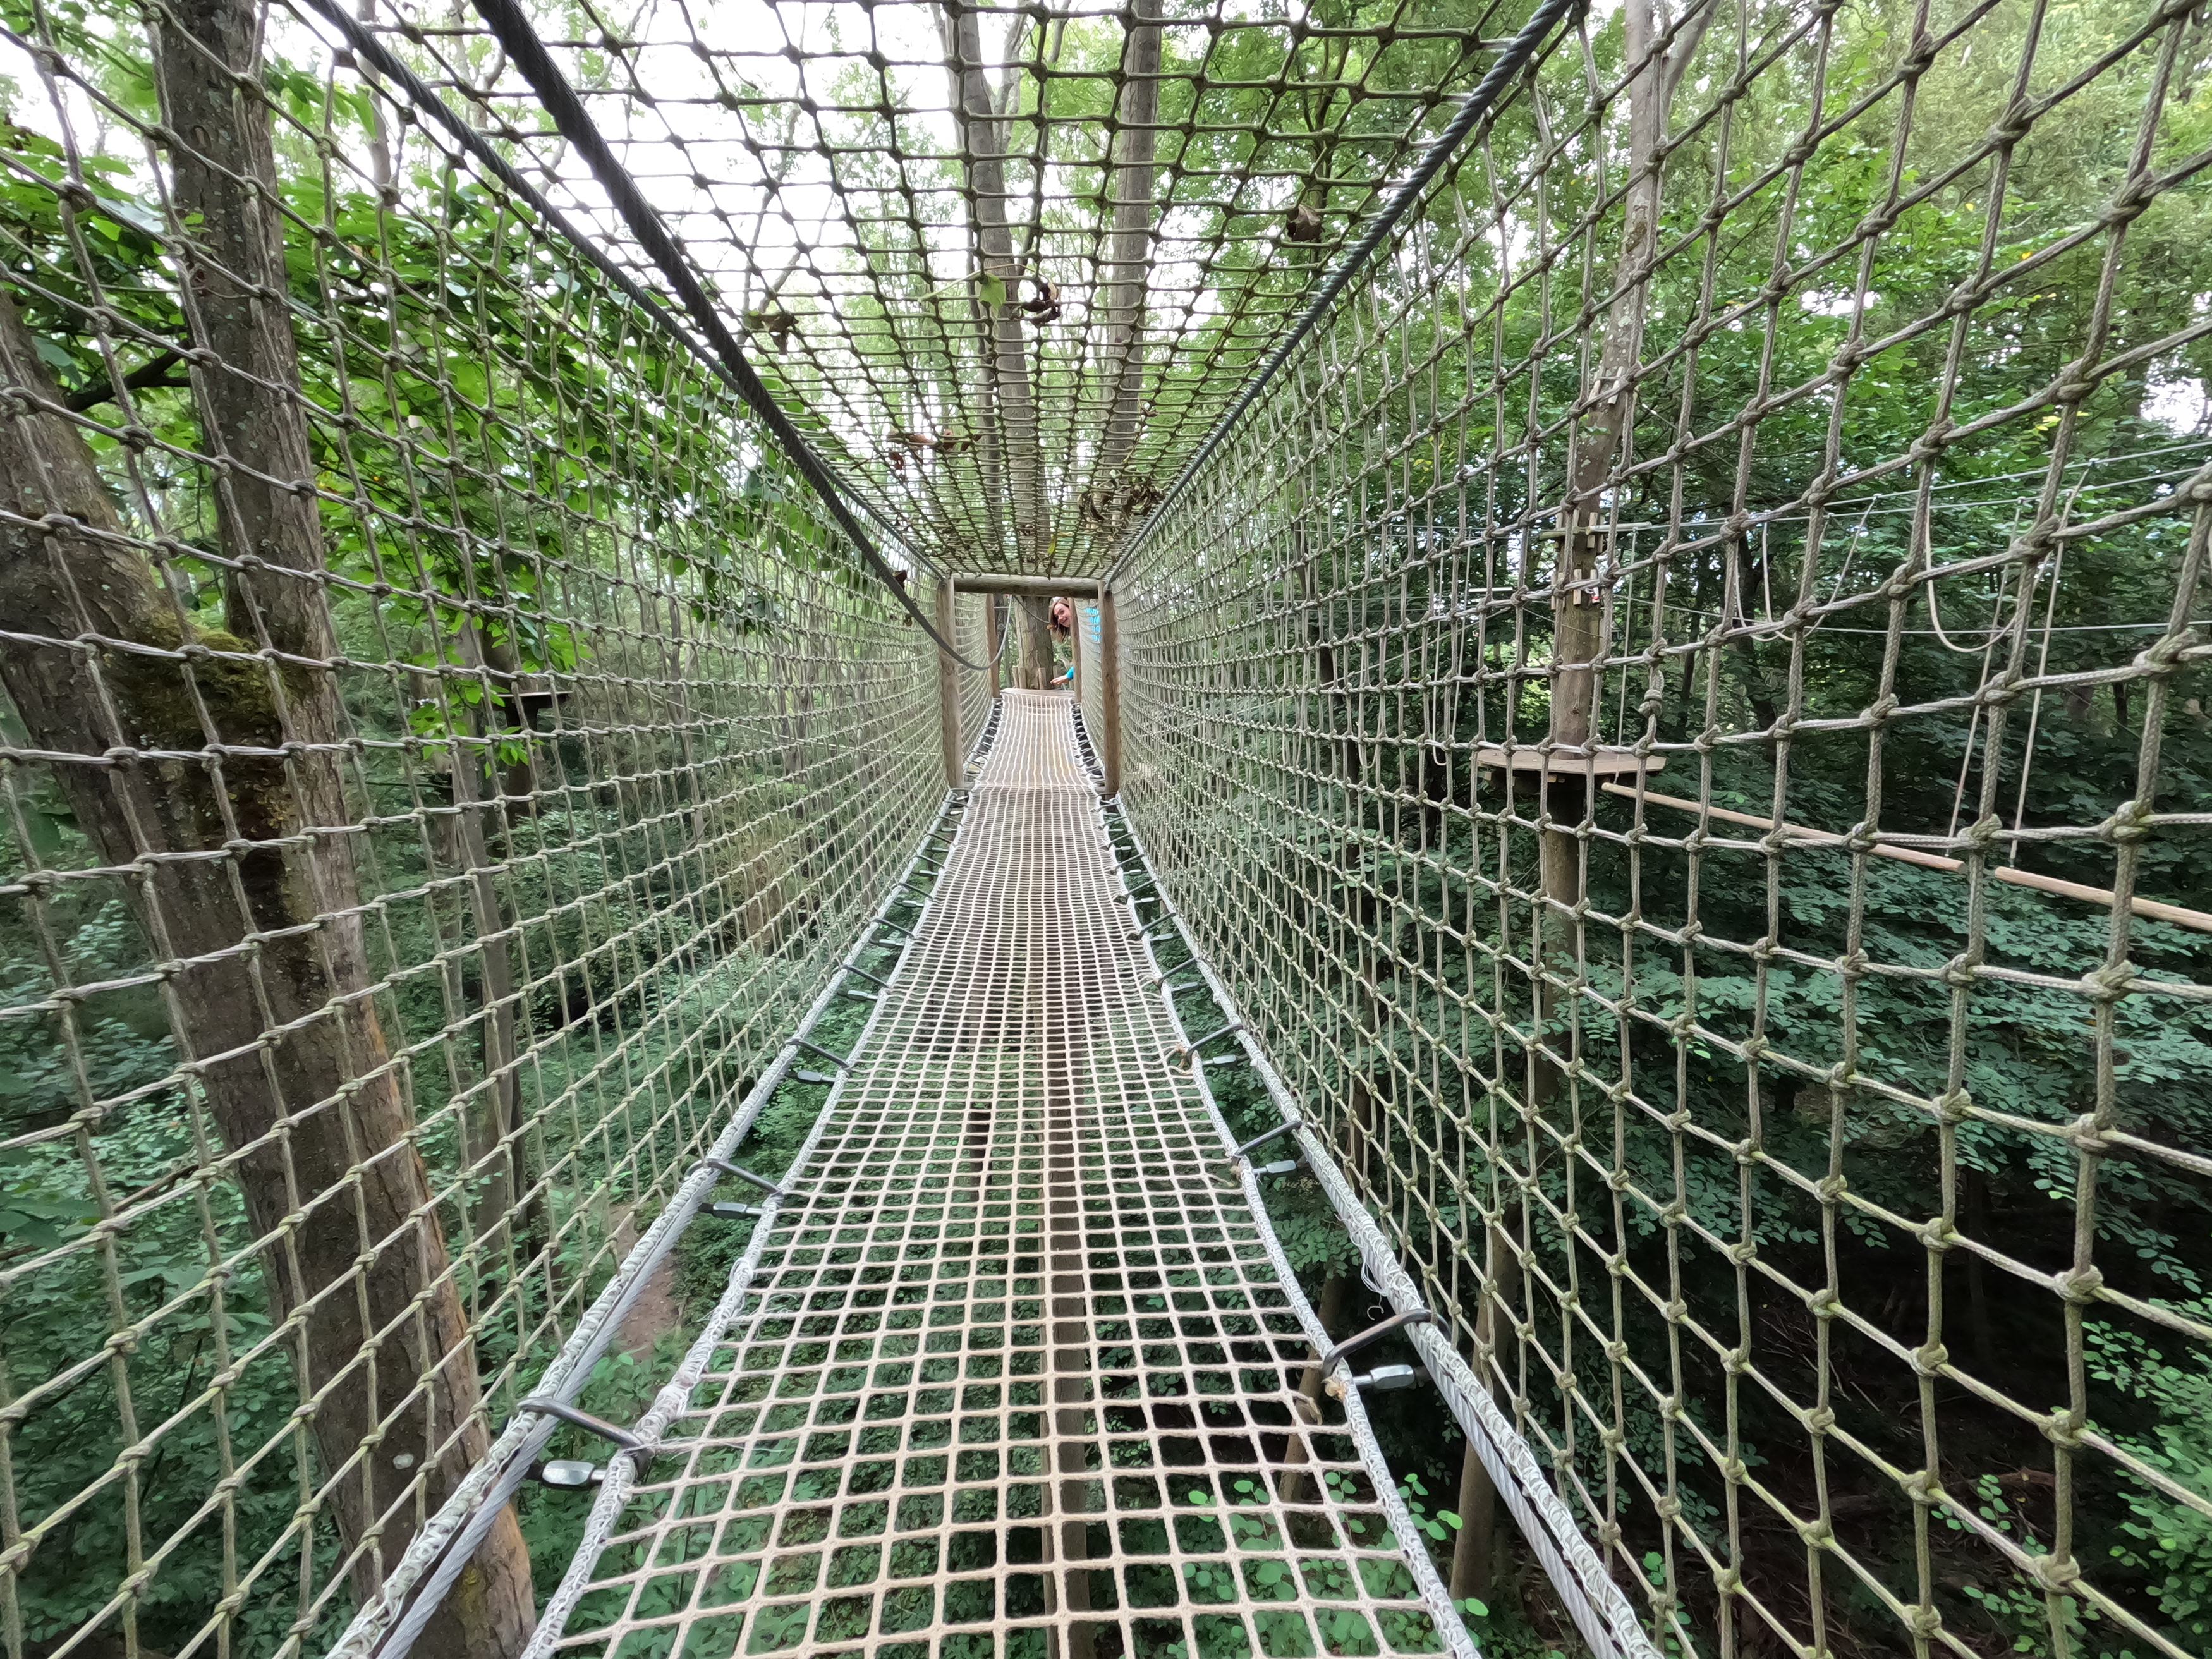 The inside of a netting tunnel at a GoApe adventure park